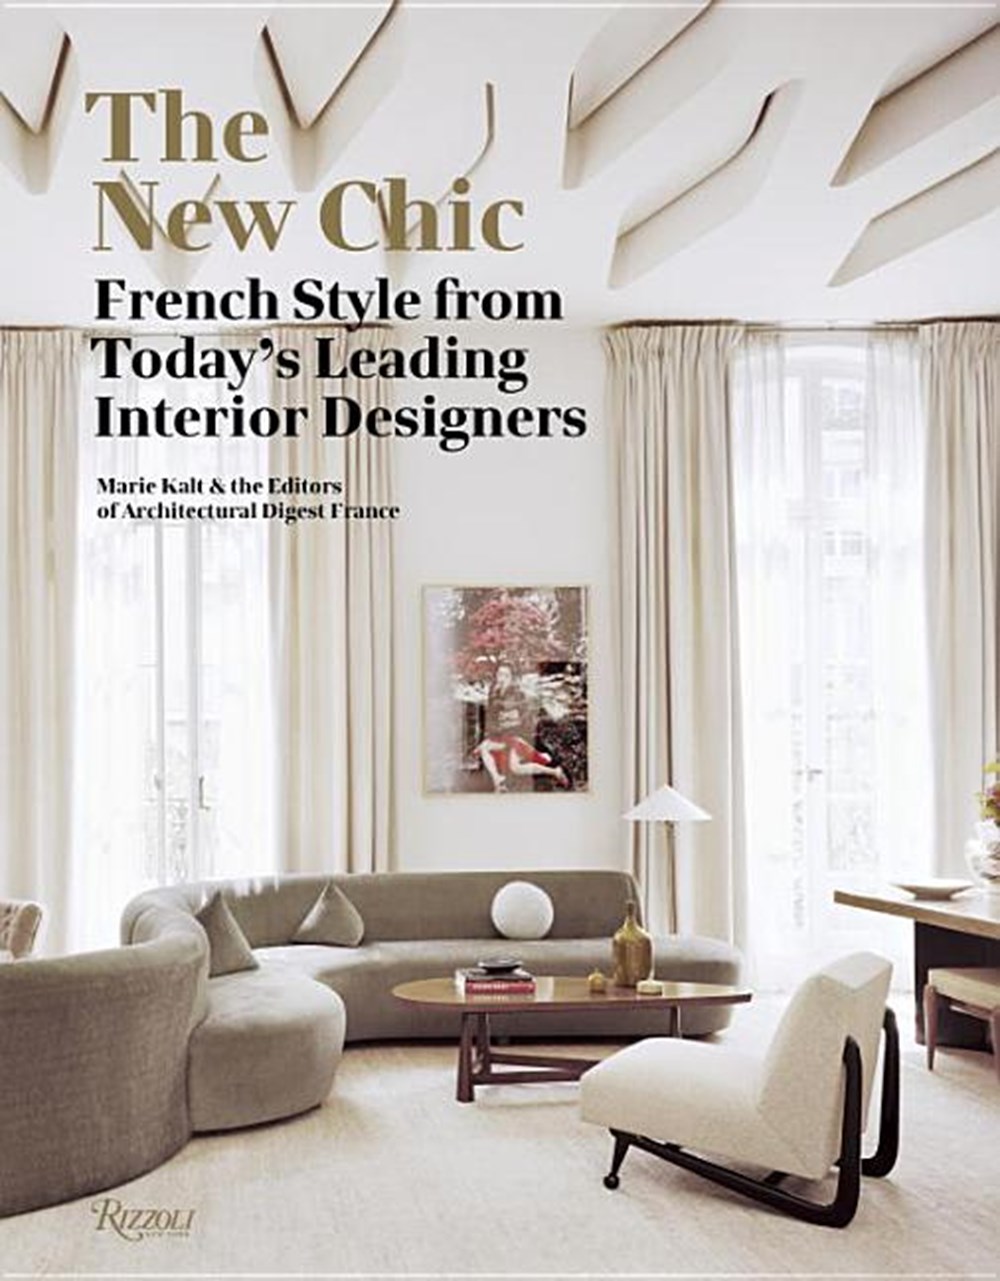 New Chic: French Style from Today's Leading Interior Designers